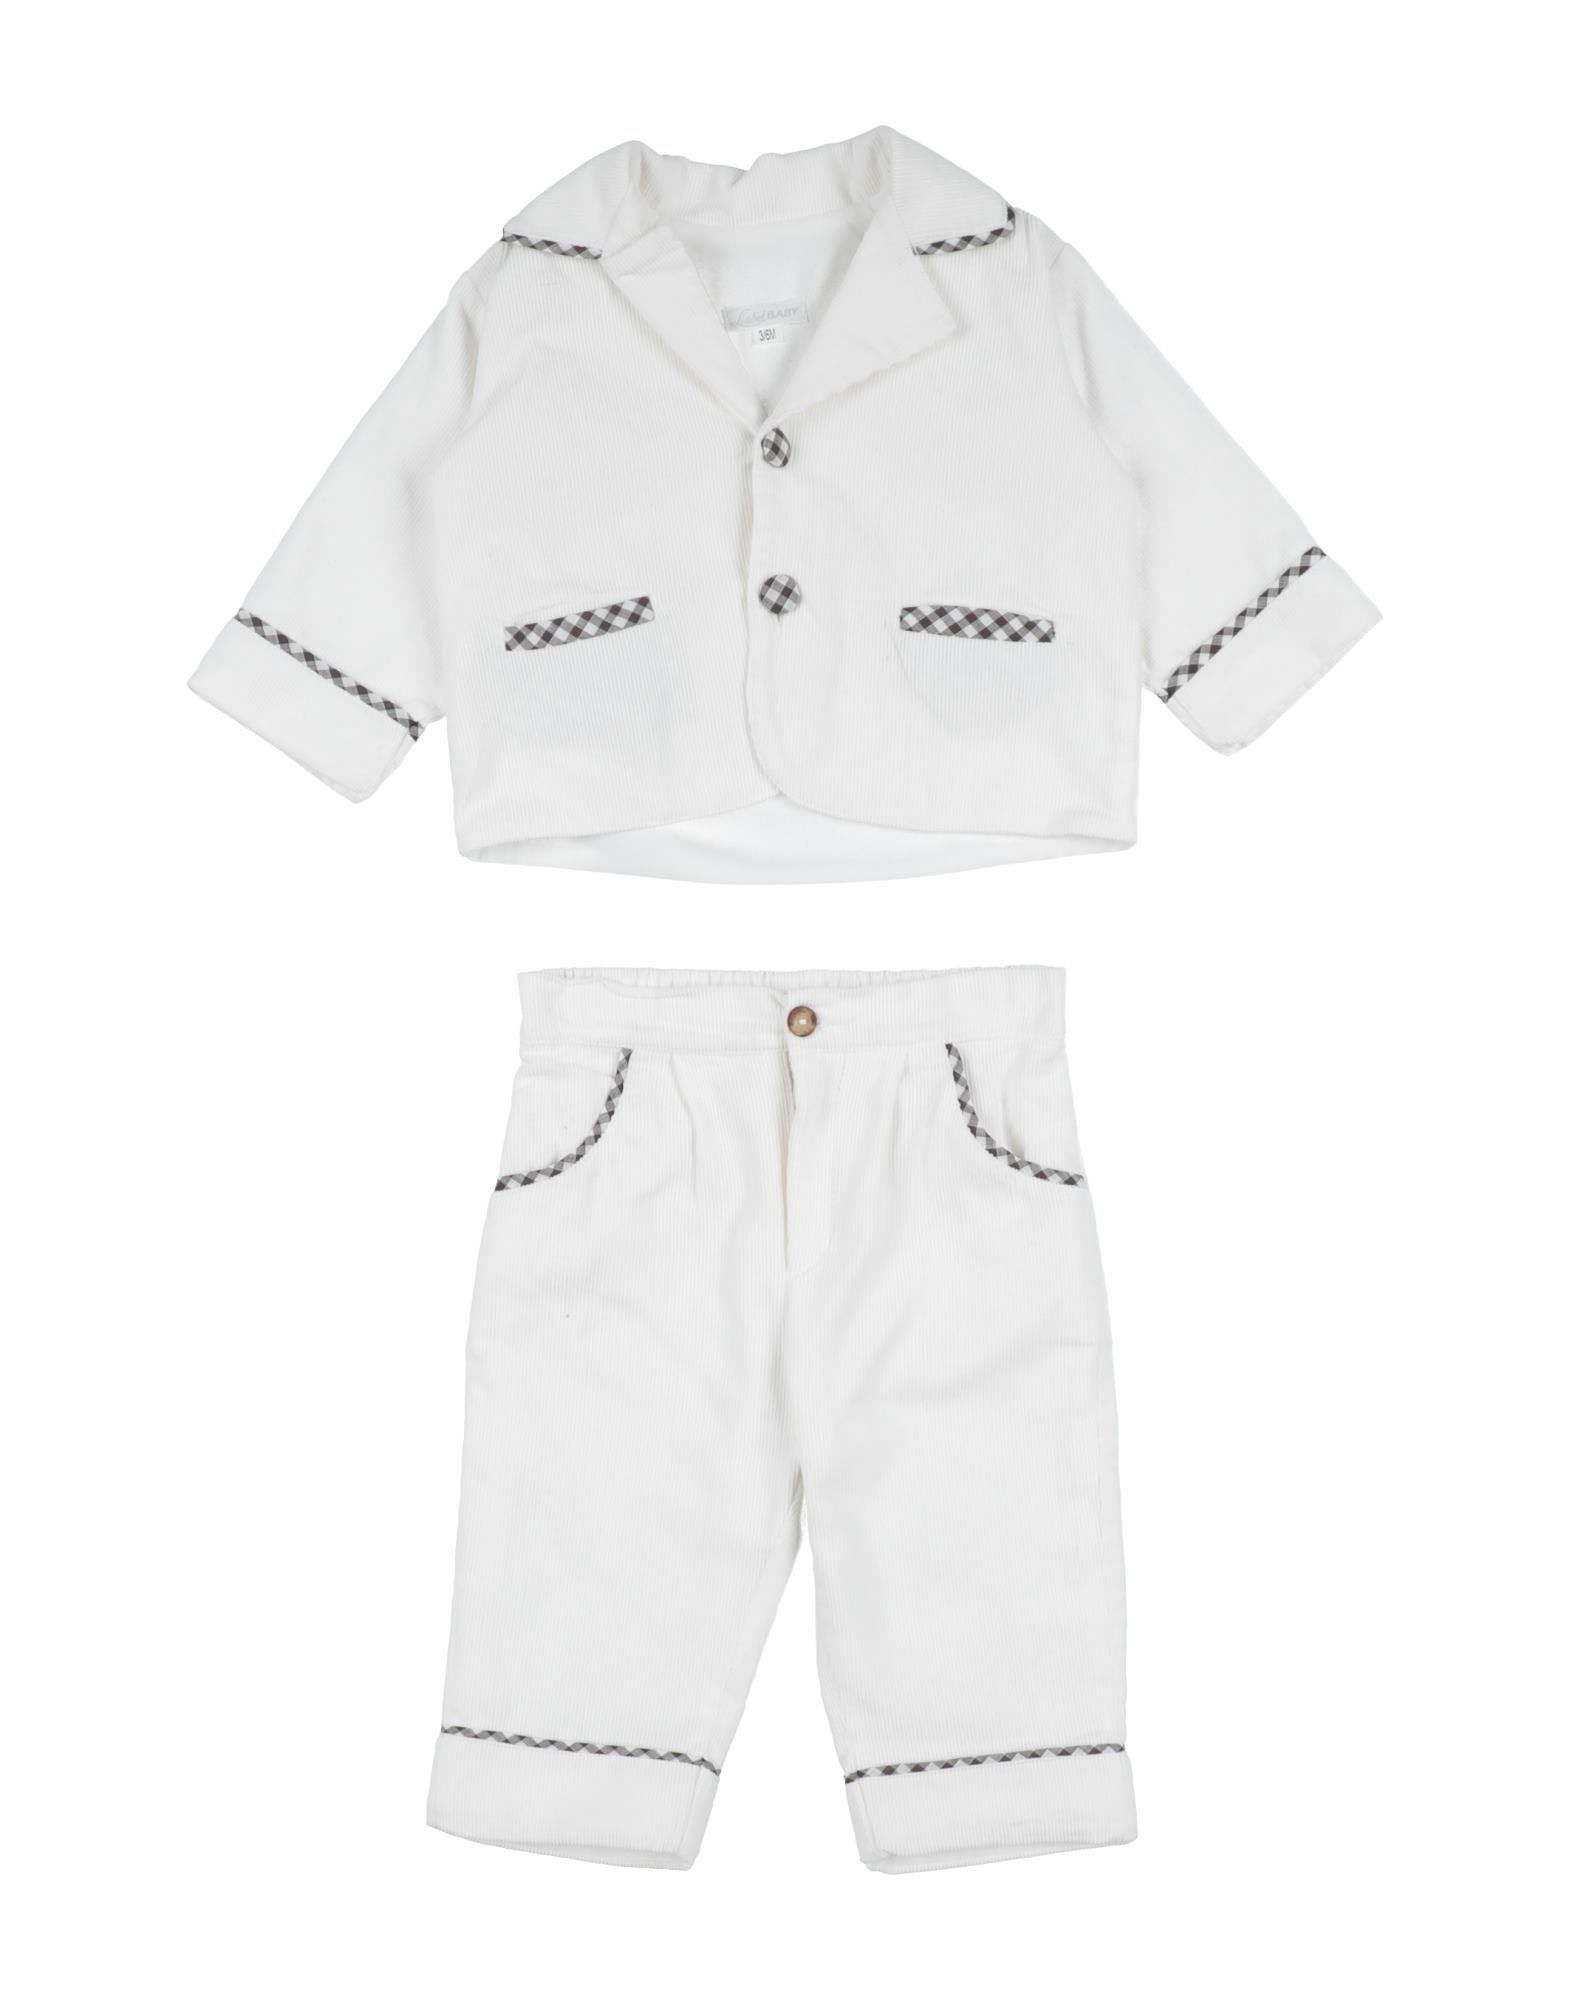 Liabel Kids' Suits In White